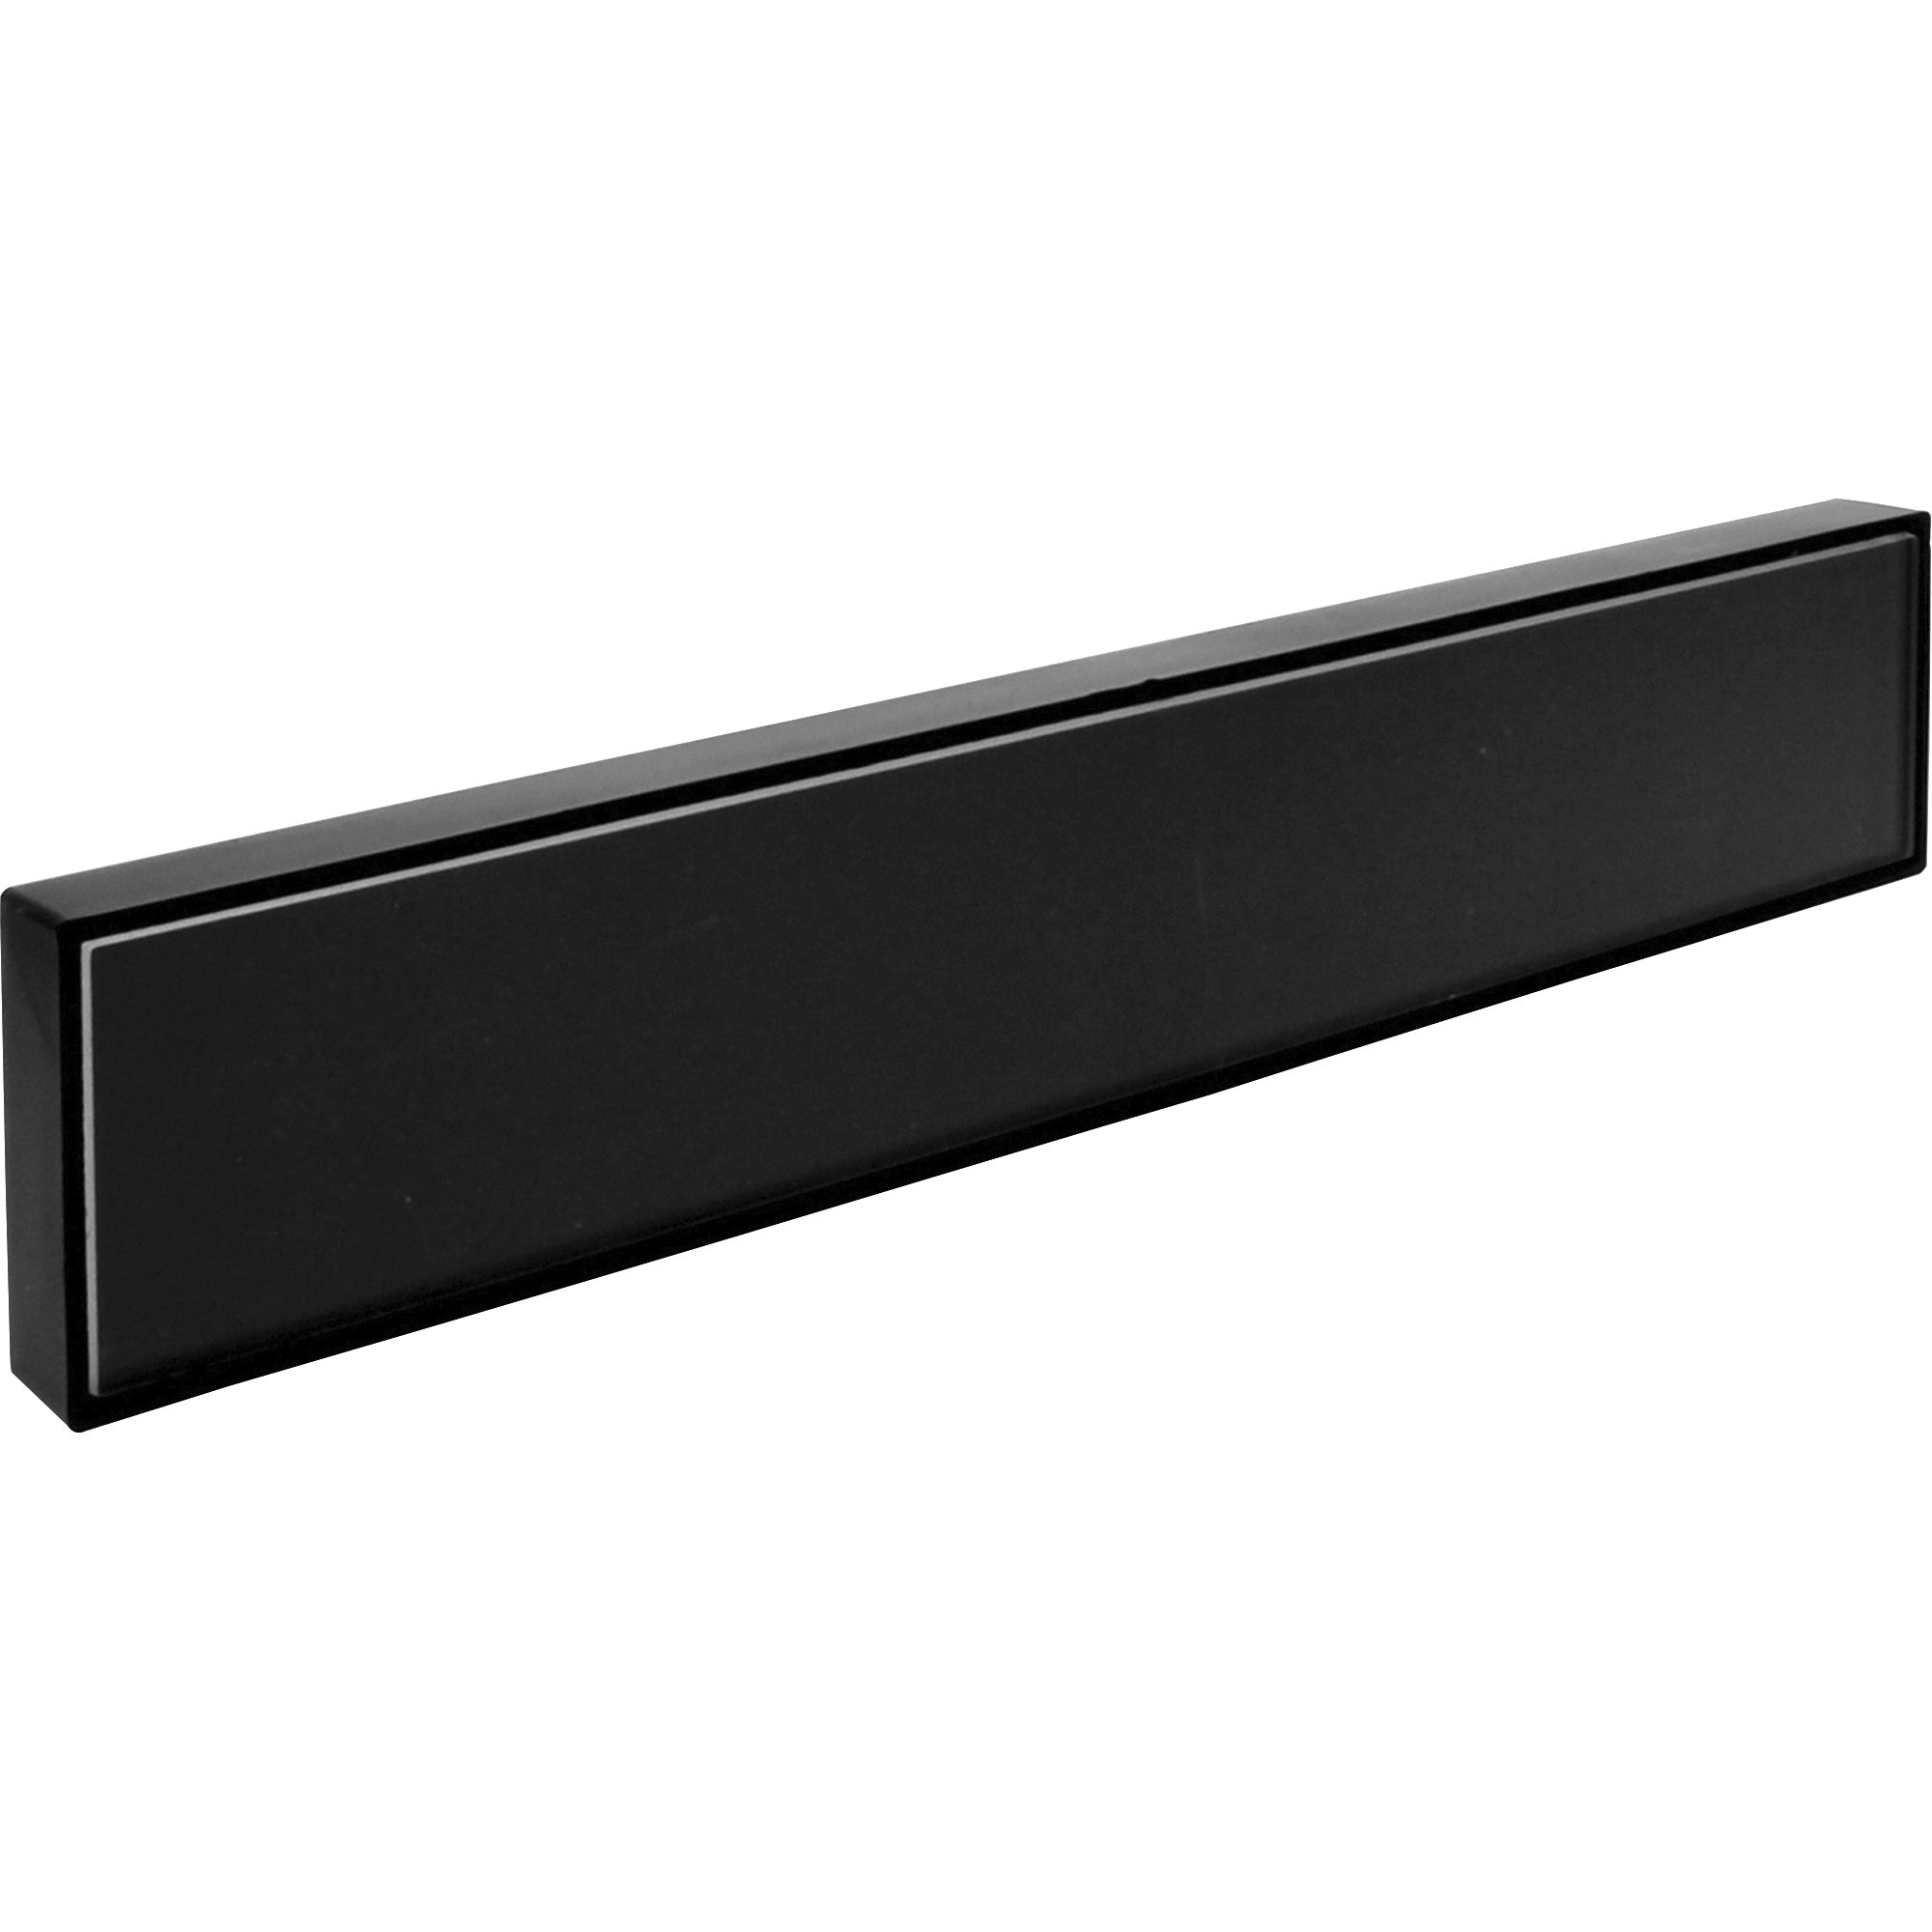 lorell-snap-plate-architectural-sign-1-each-10-width-x-2-height-x-10-depth-rectangular-shape-surface-mountable-easy-readability-injection-molded-easy-to-use-black_llr02646 - 1